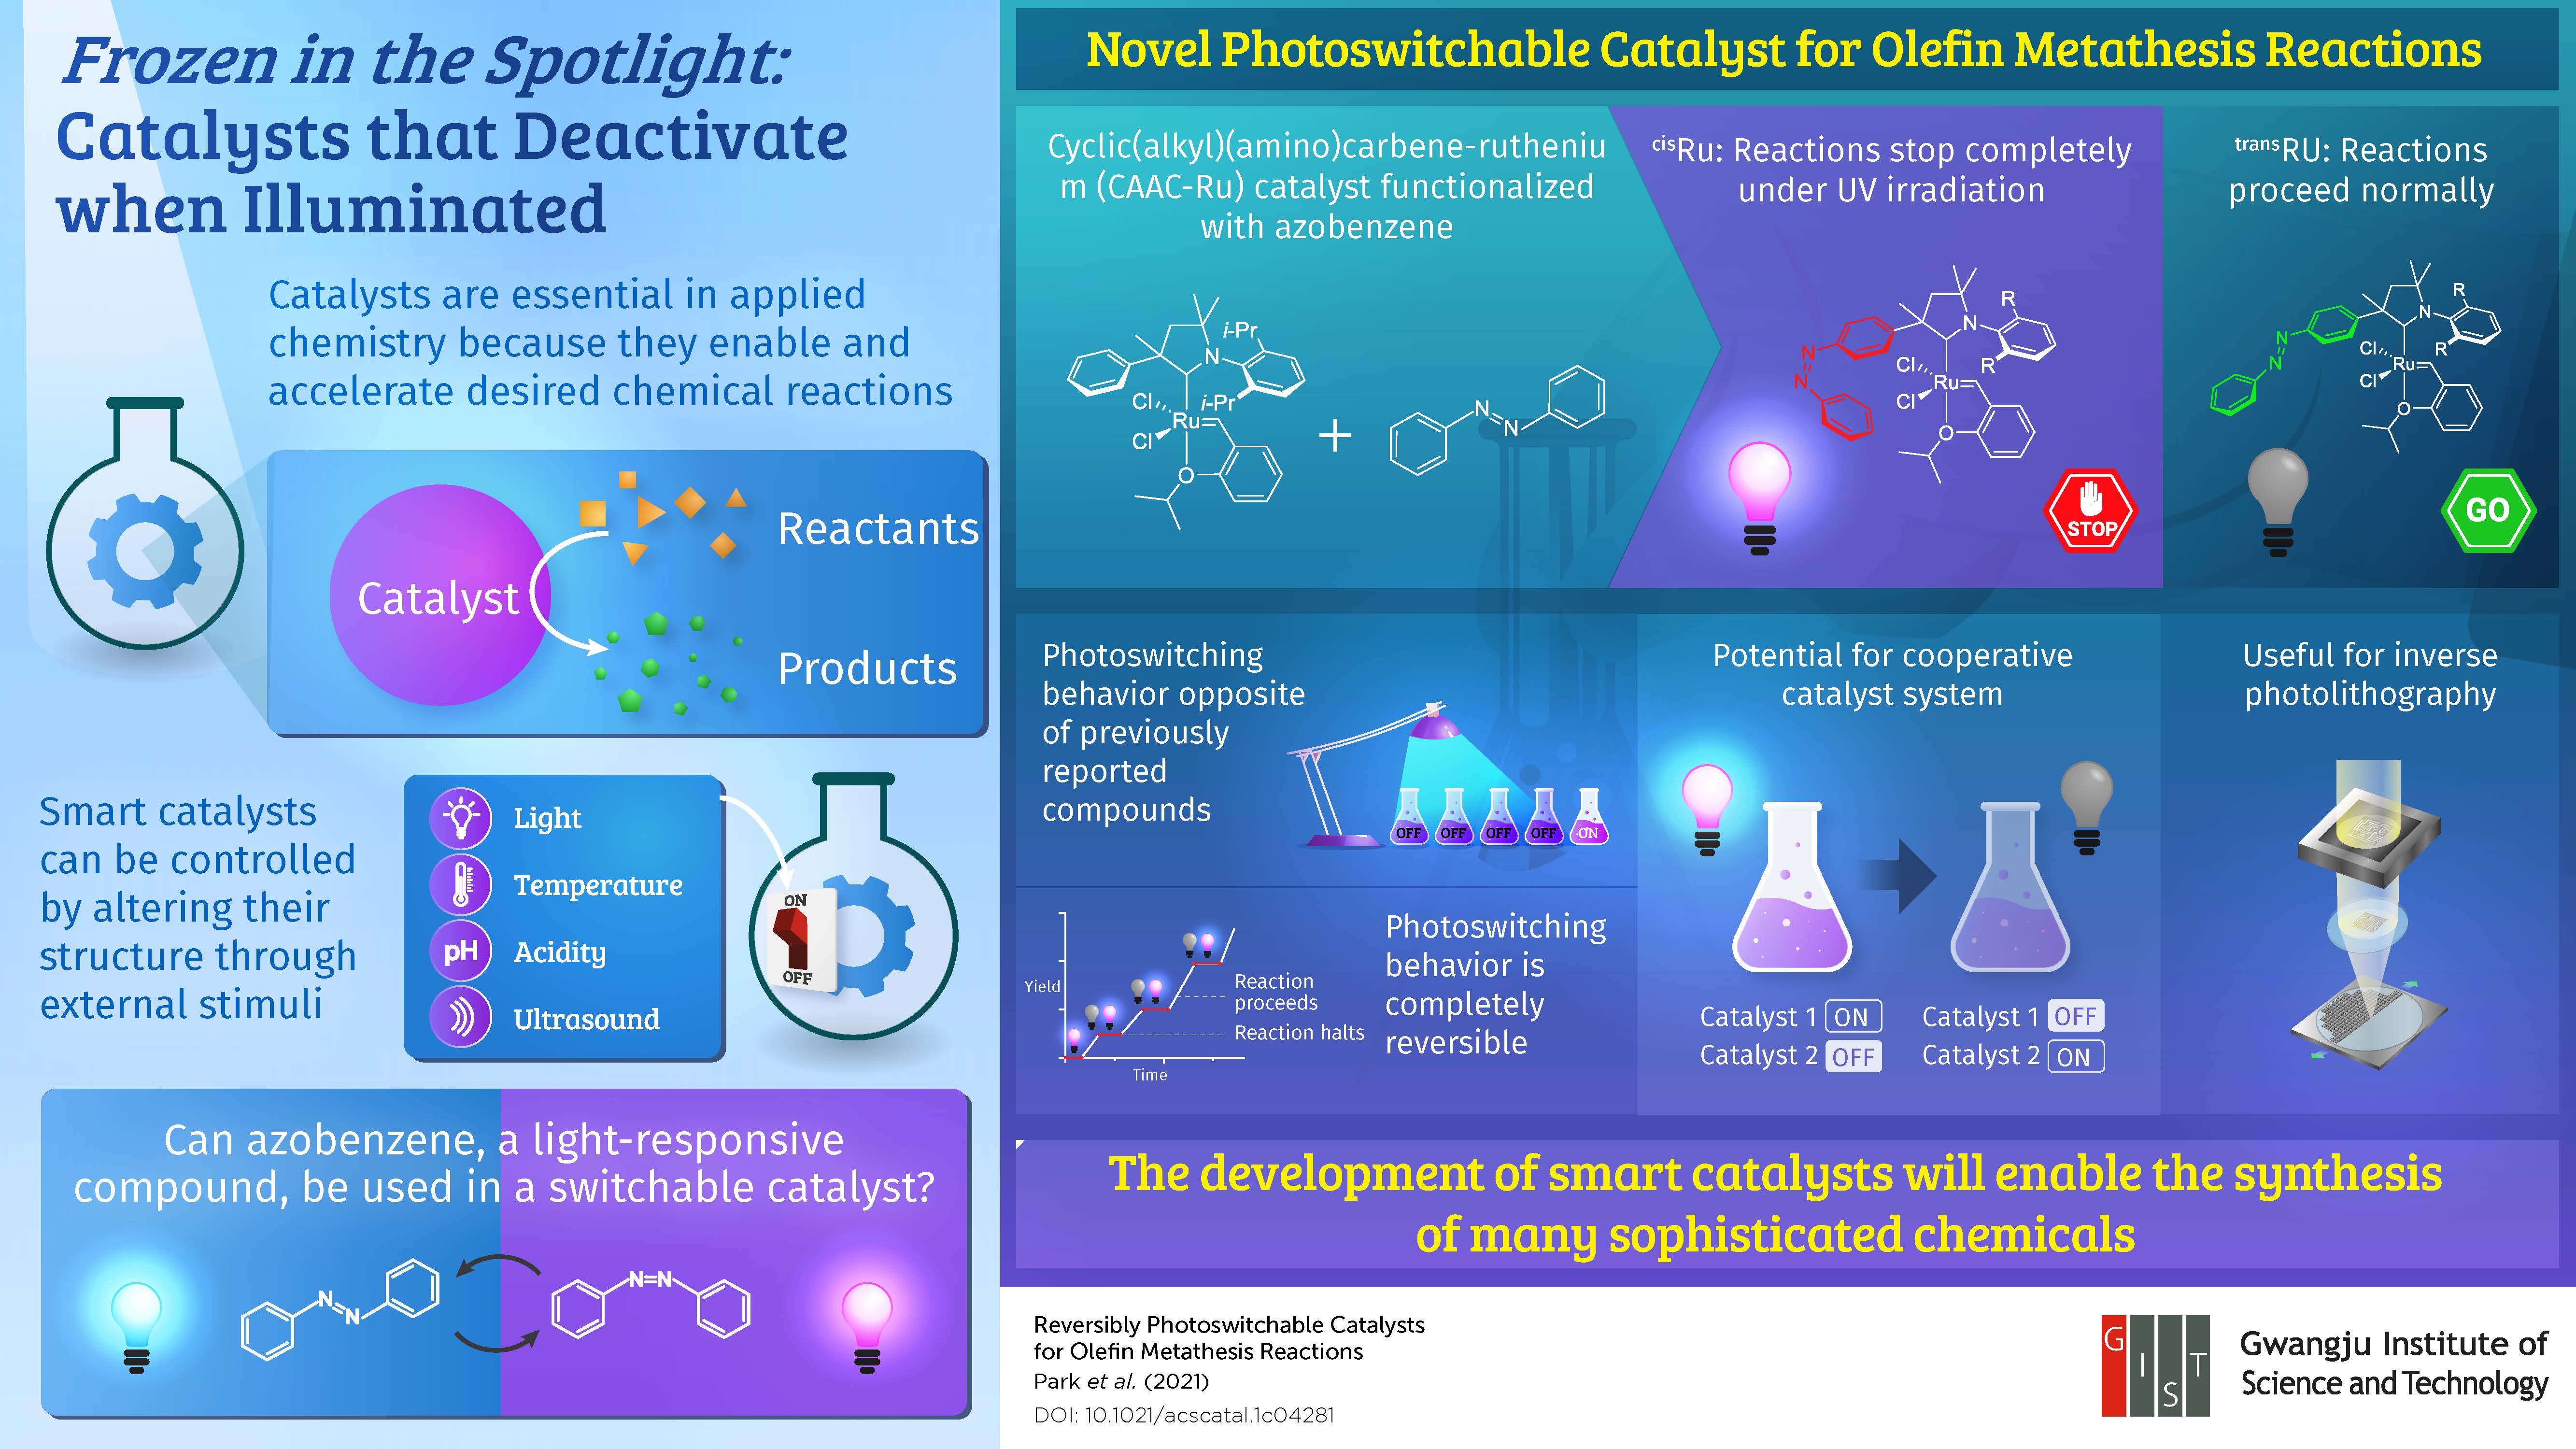 Frozen in the Spotlight: Scientists from the Gwangju Institute of Science and Technology Develop Catalyst that Turns Off when Illuminated 이미지